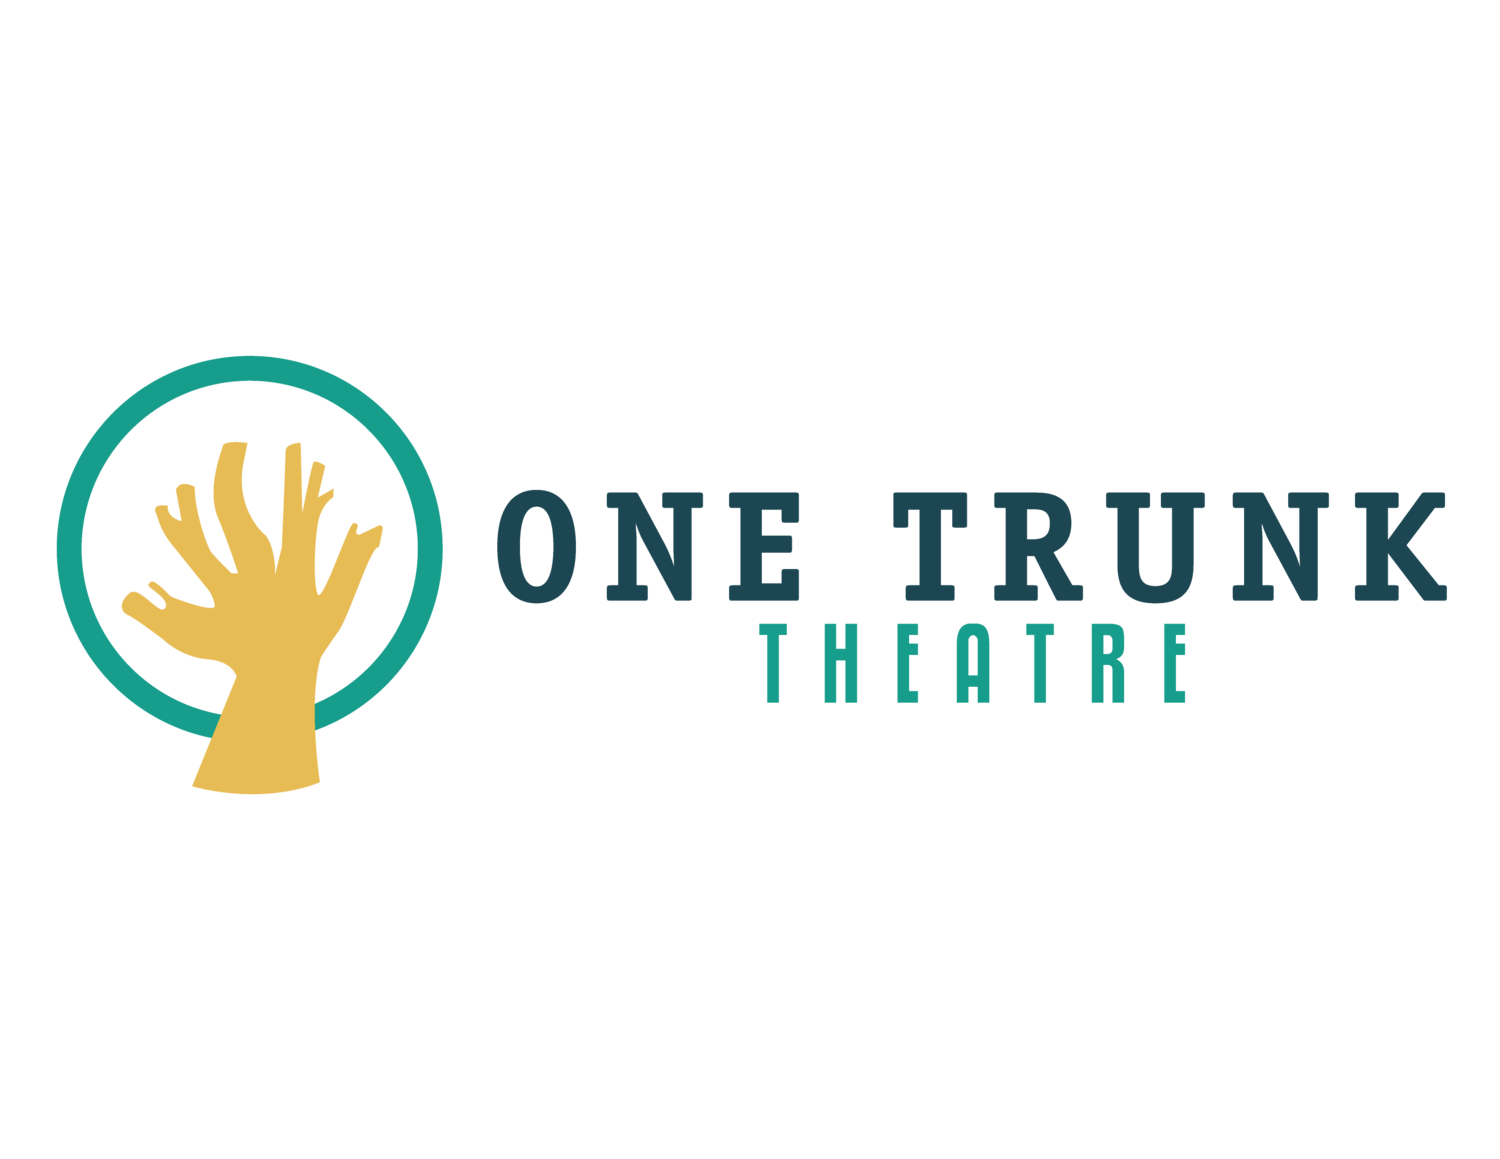 One Trunk Theatre